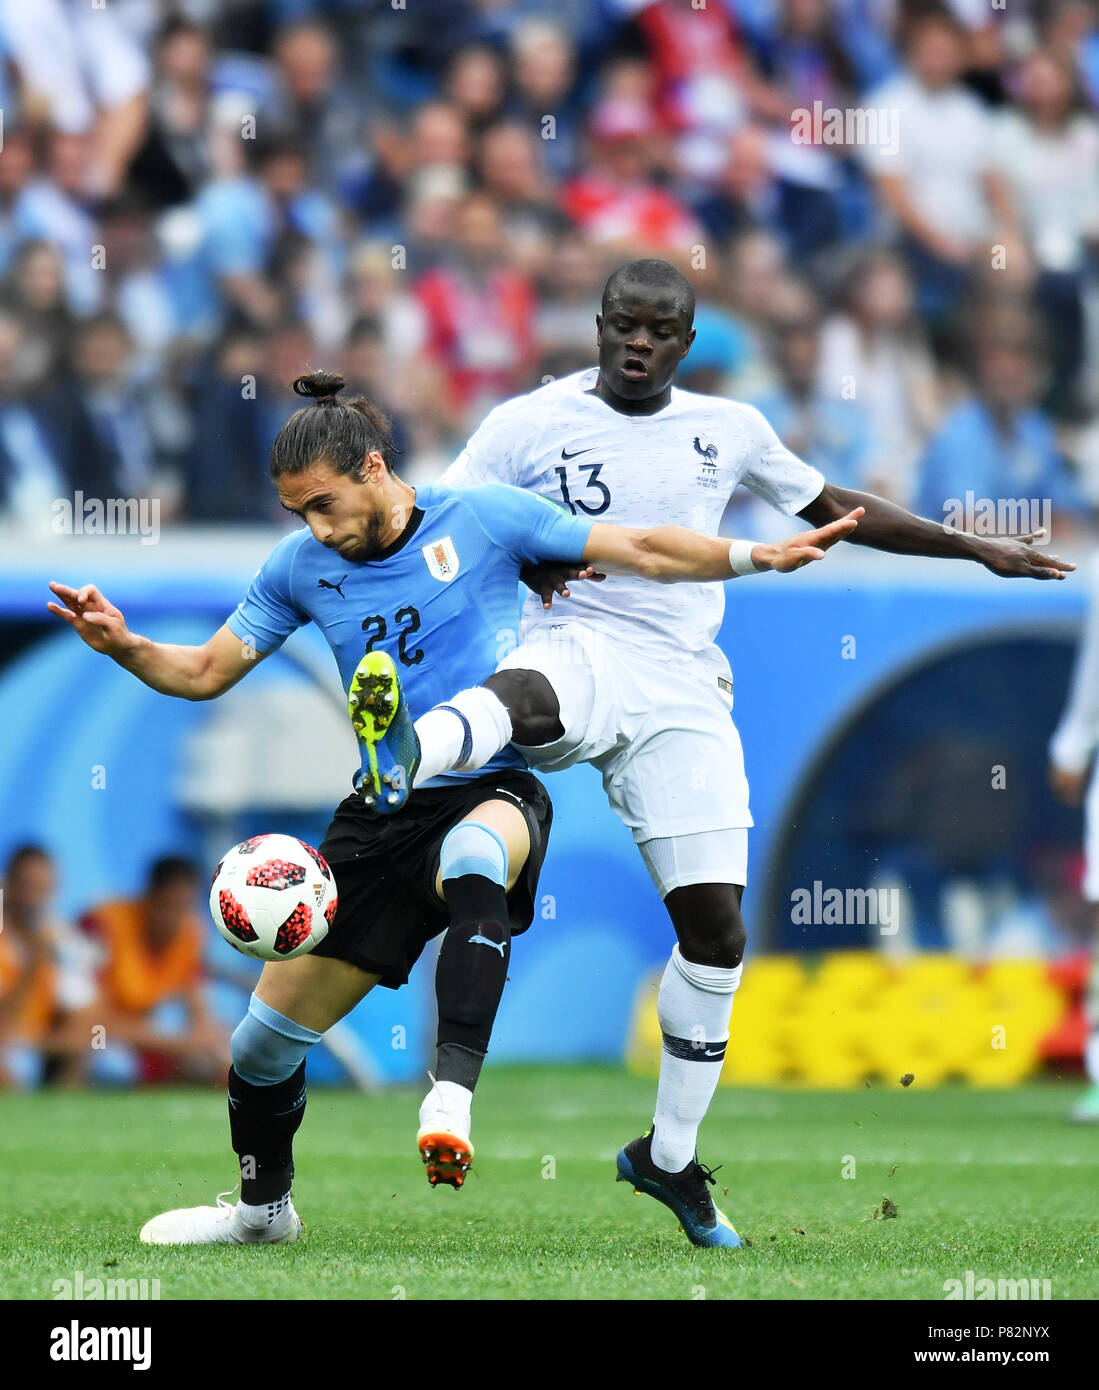 NIZHNY NOVGOROD, RUSSIA - JULY 06: Martin Caceres of Uruguay competes with Ngolo Kante of France during the 2018 FIFA World Cup Russia Quarter Final match between Uruguay and France at Nizhny Novgorod Stadium on July 6, 2018 in Nizhny Novgorod, Russia. (Photo by Lukasz Laskowski/PressFocus/MB Media) Stock Photo